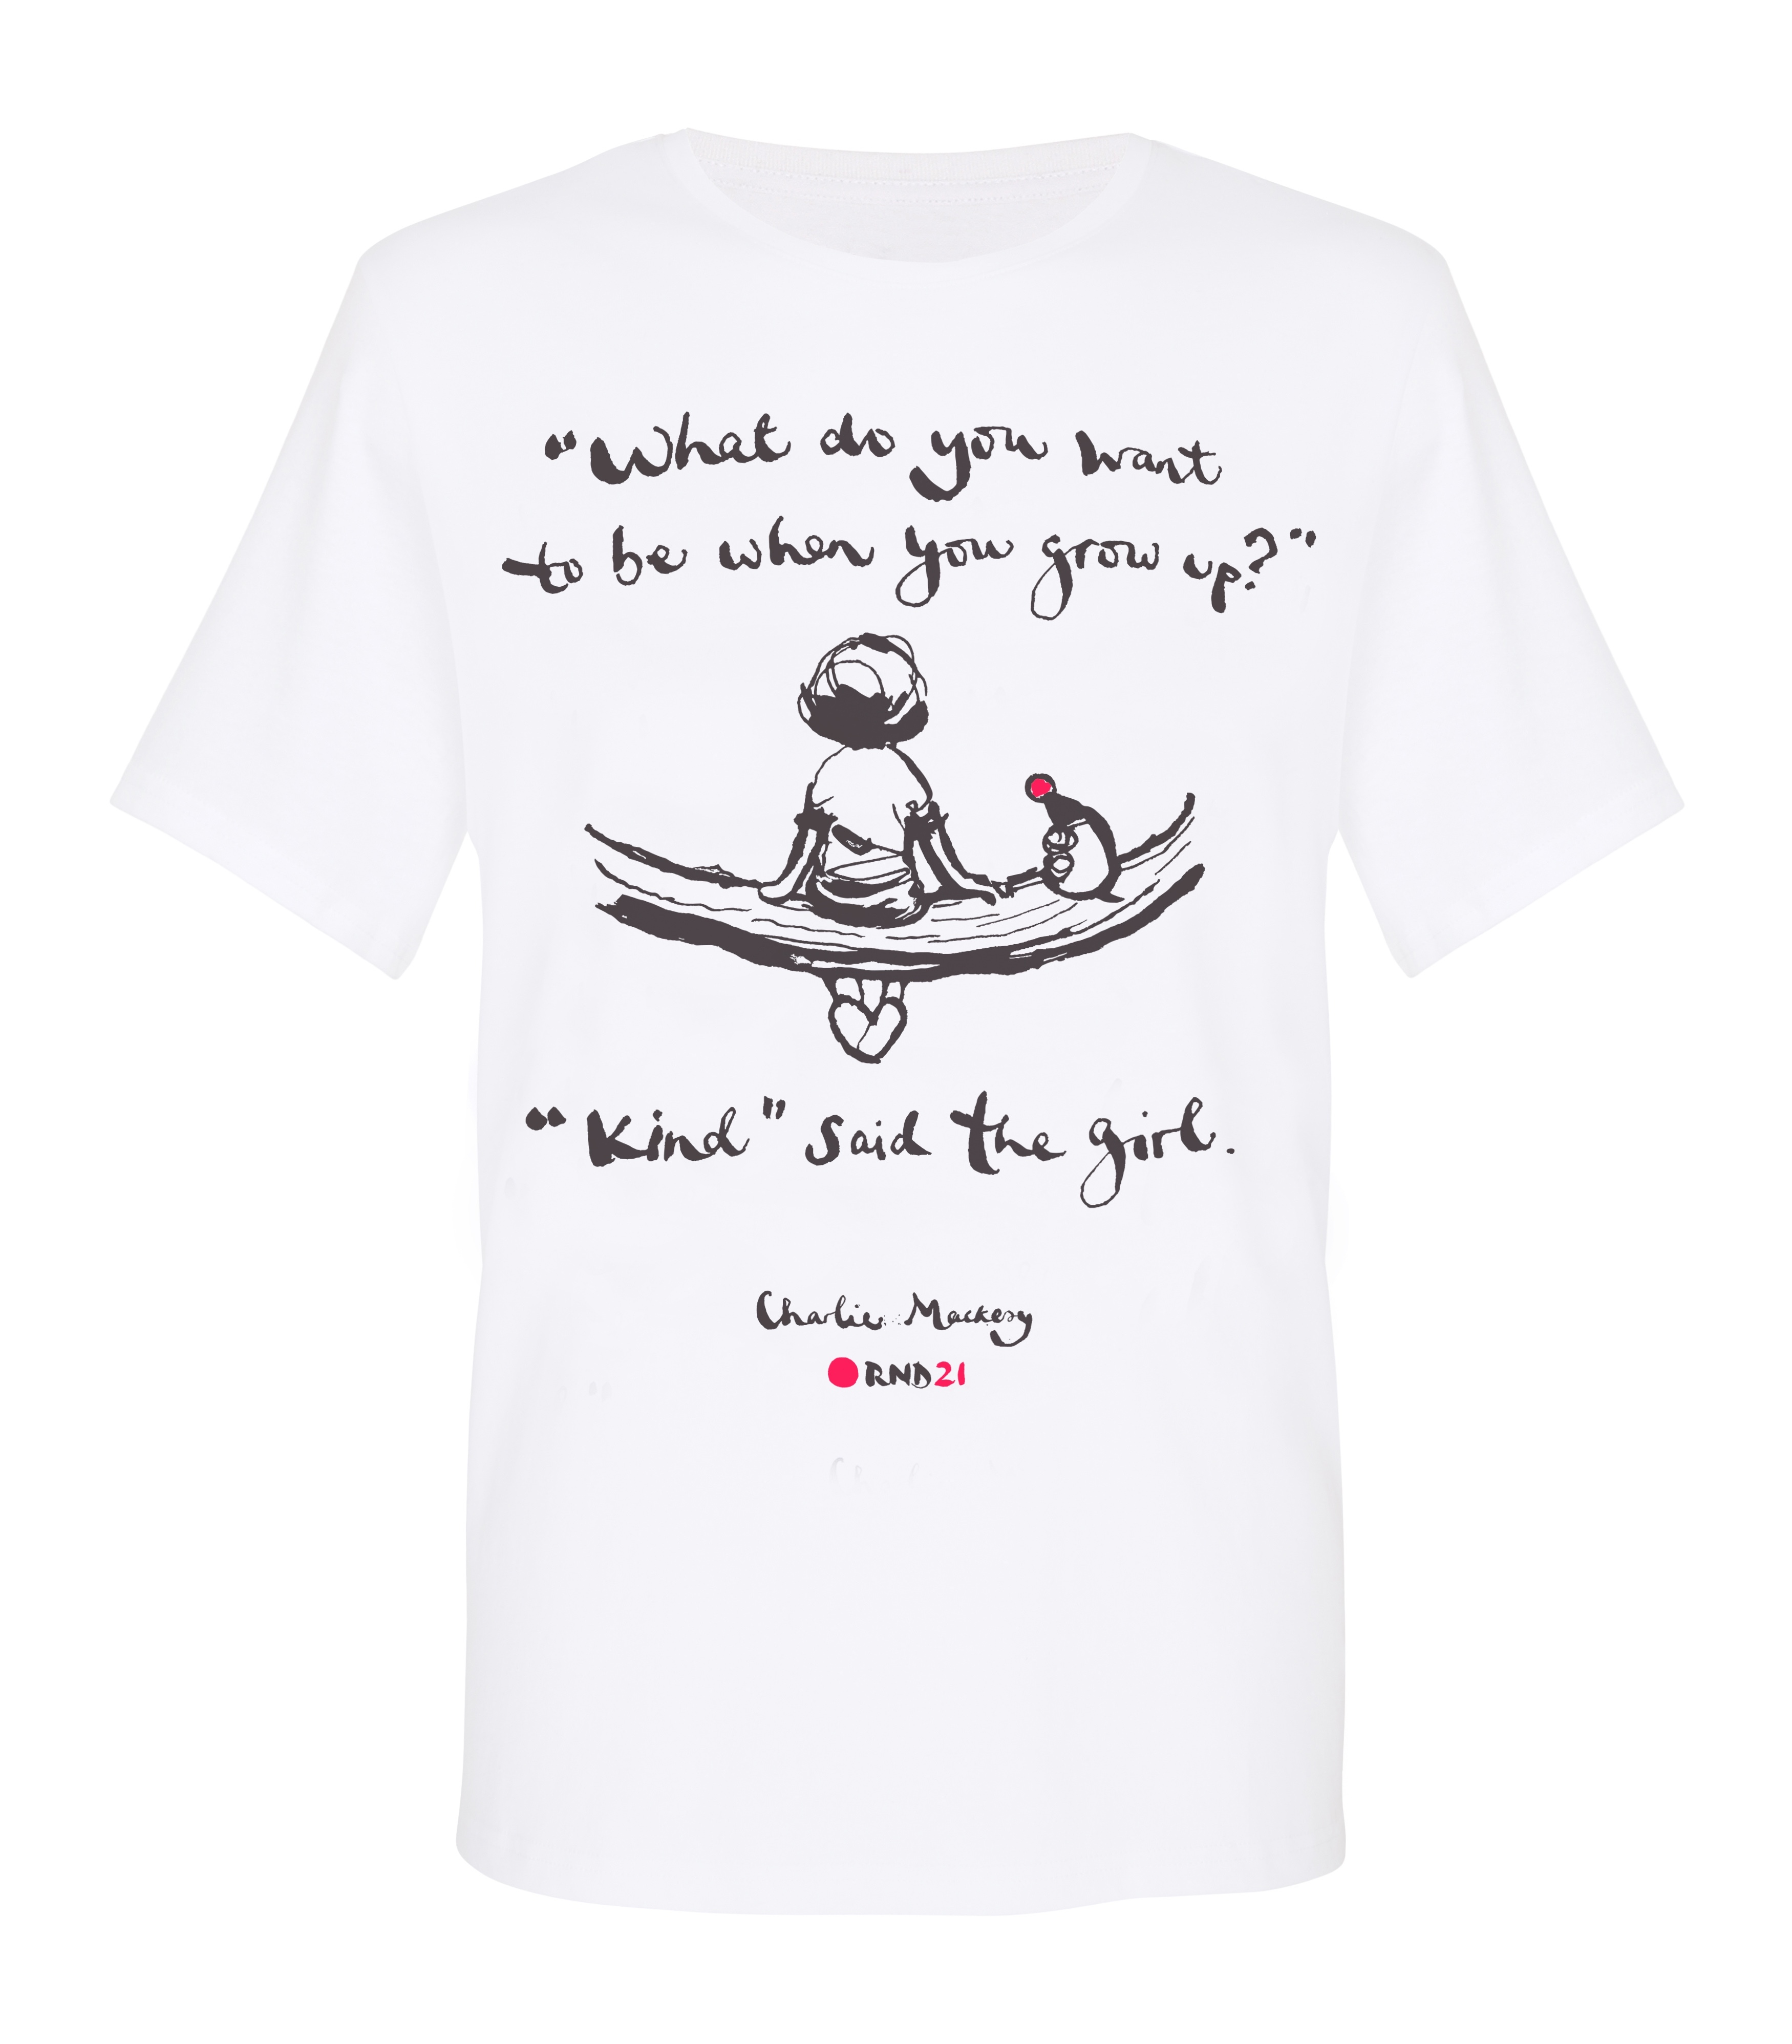 TWO LIMITED EDITION RED NOSE DAY TSHIRTS DESIGNED BY